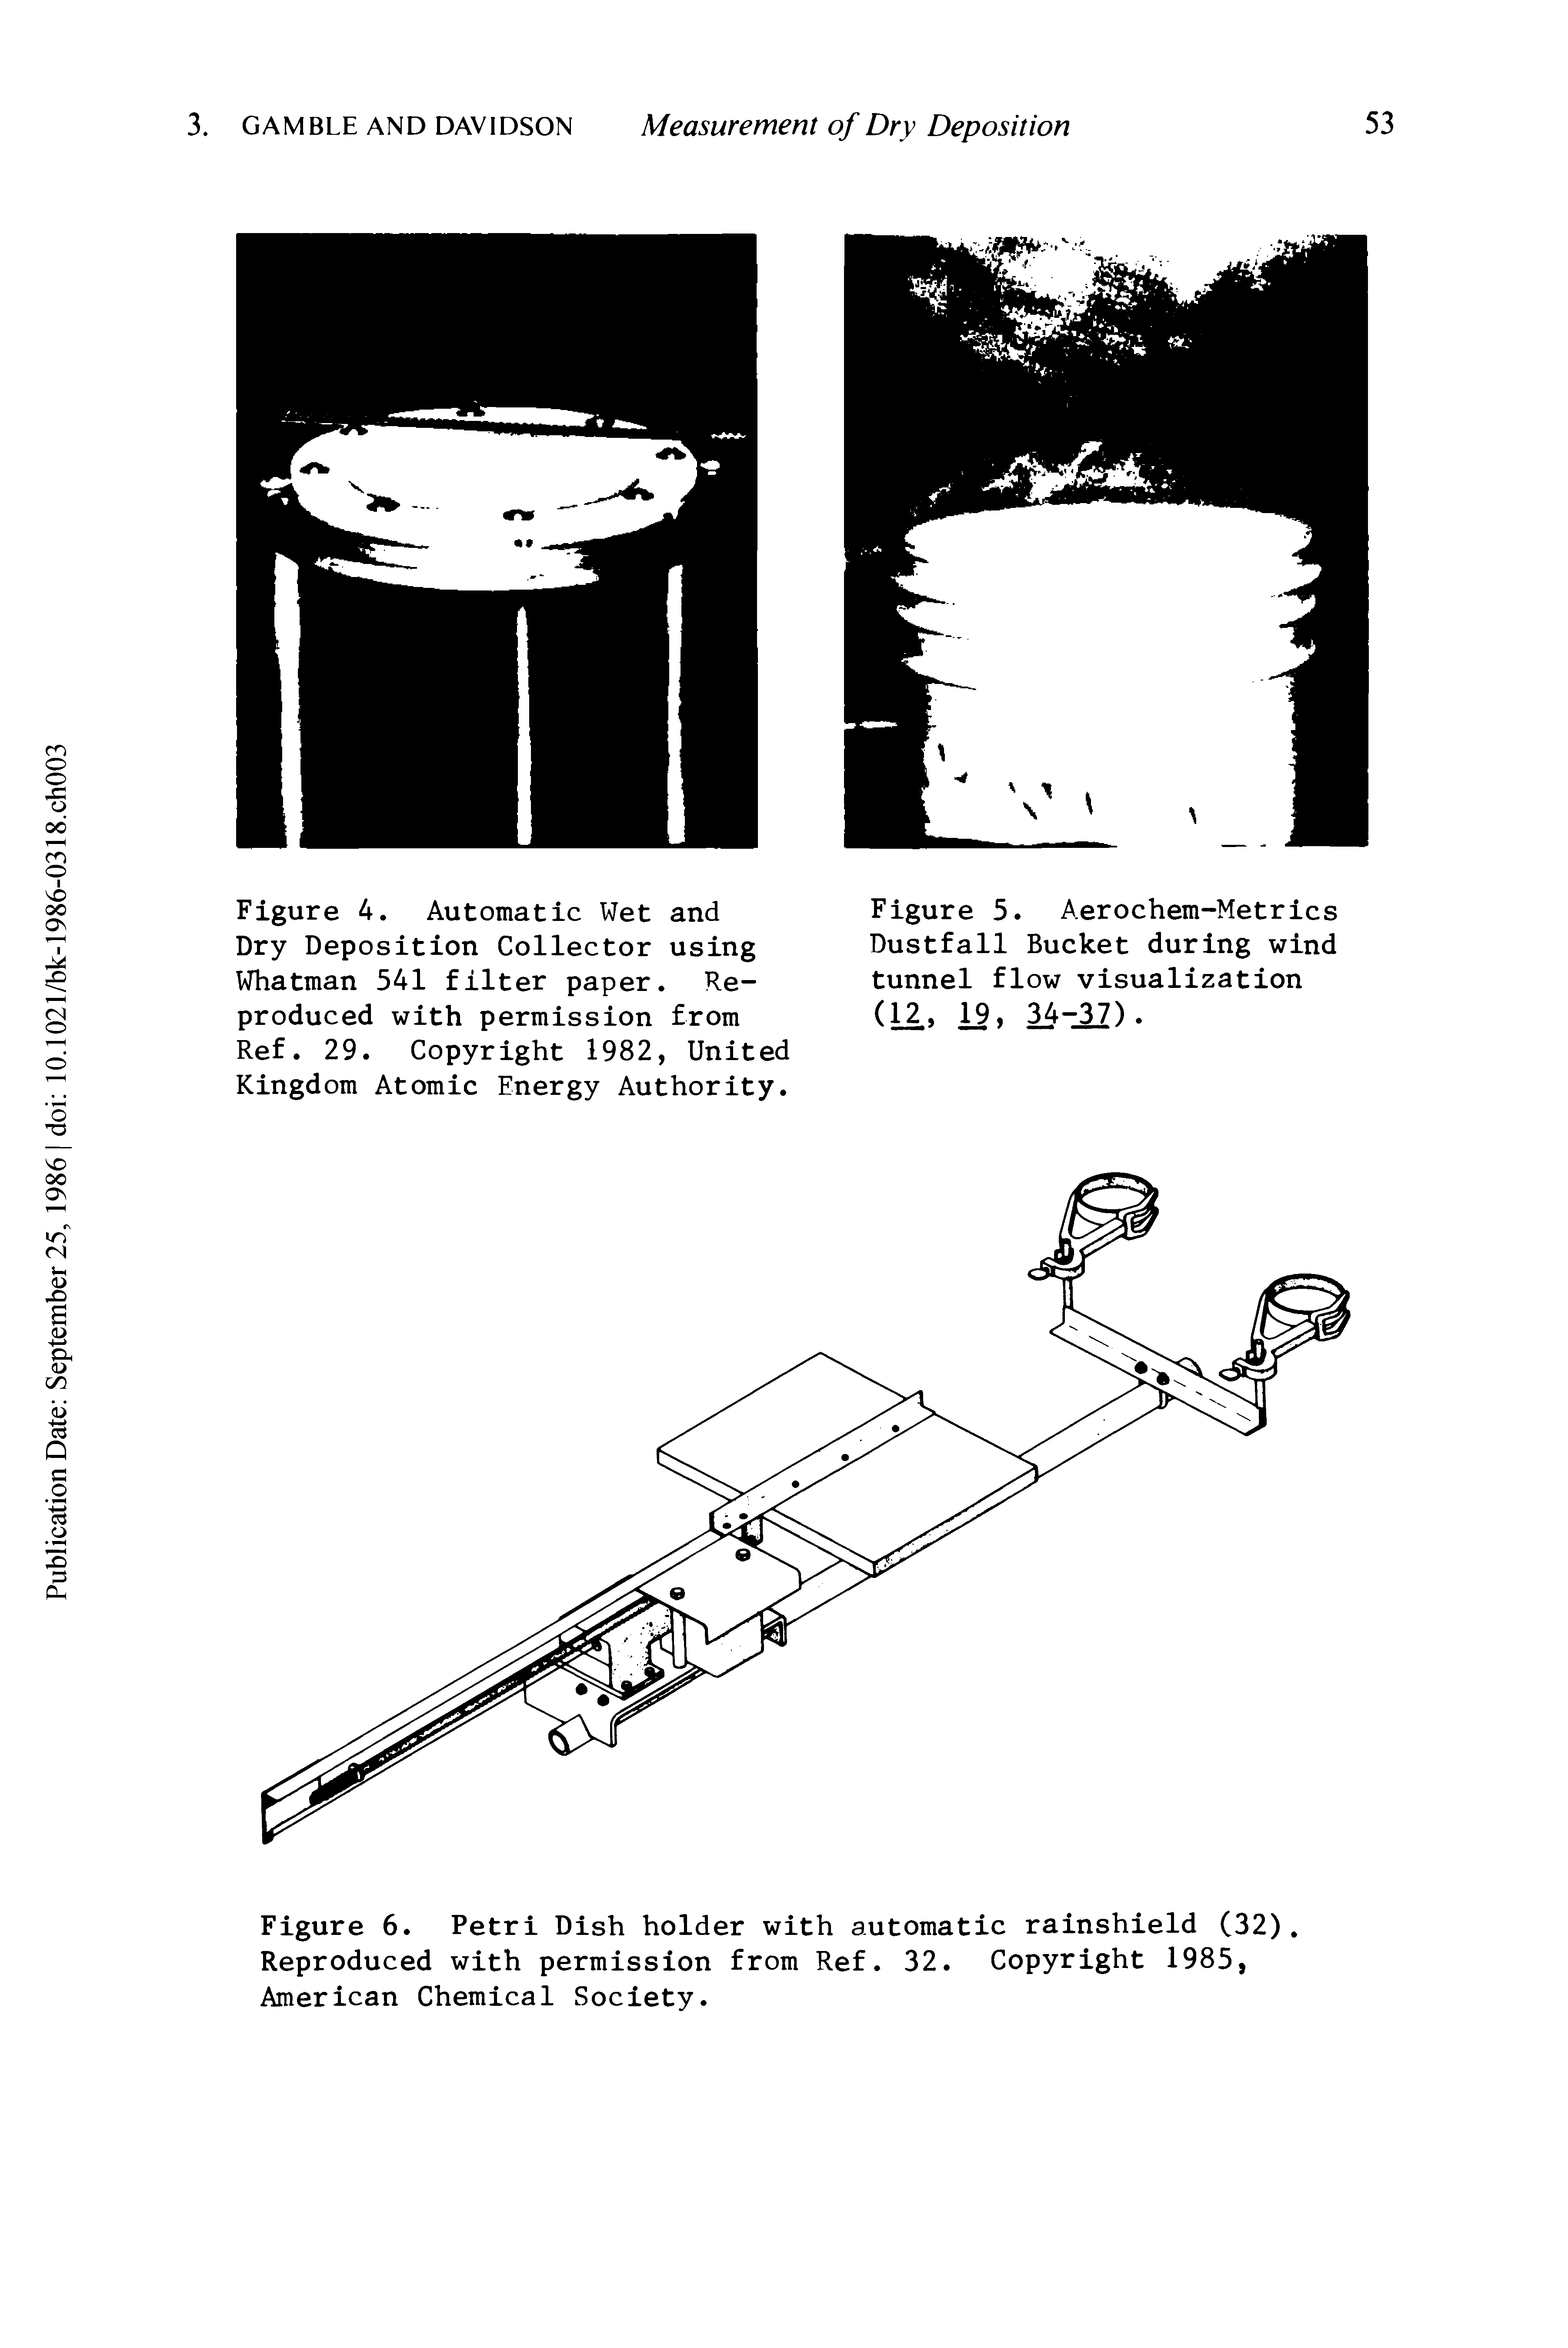 Figure 4. Automatic Wet and Dry Deposition Collector using Whatman 541 filter paper. Reproduced with permission from Ref. 29. Copyright 1982, United Kingdom Atomic Energy Authority.